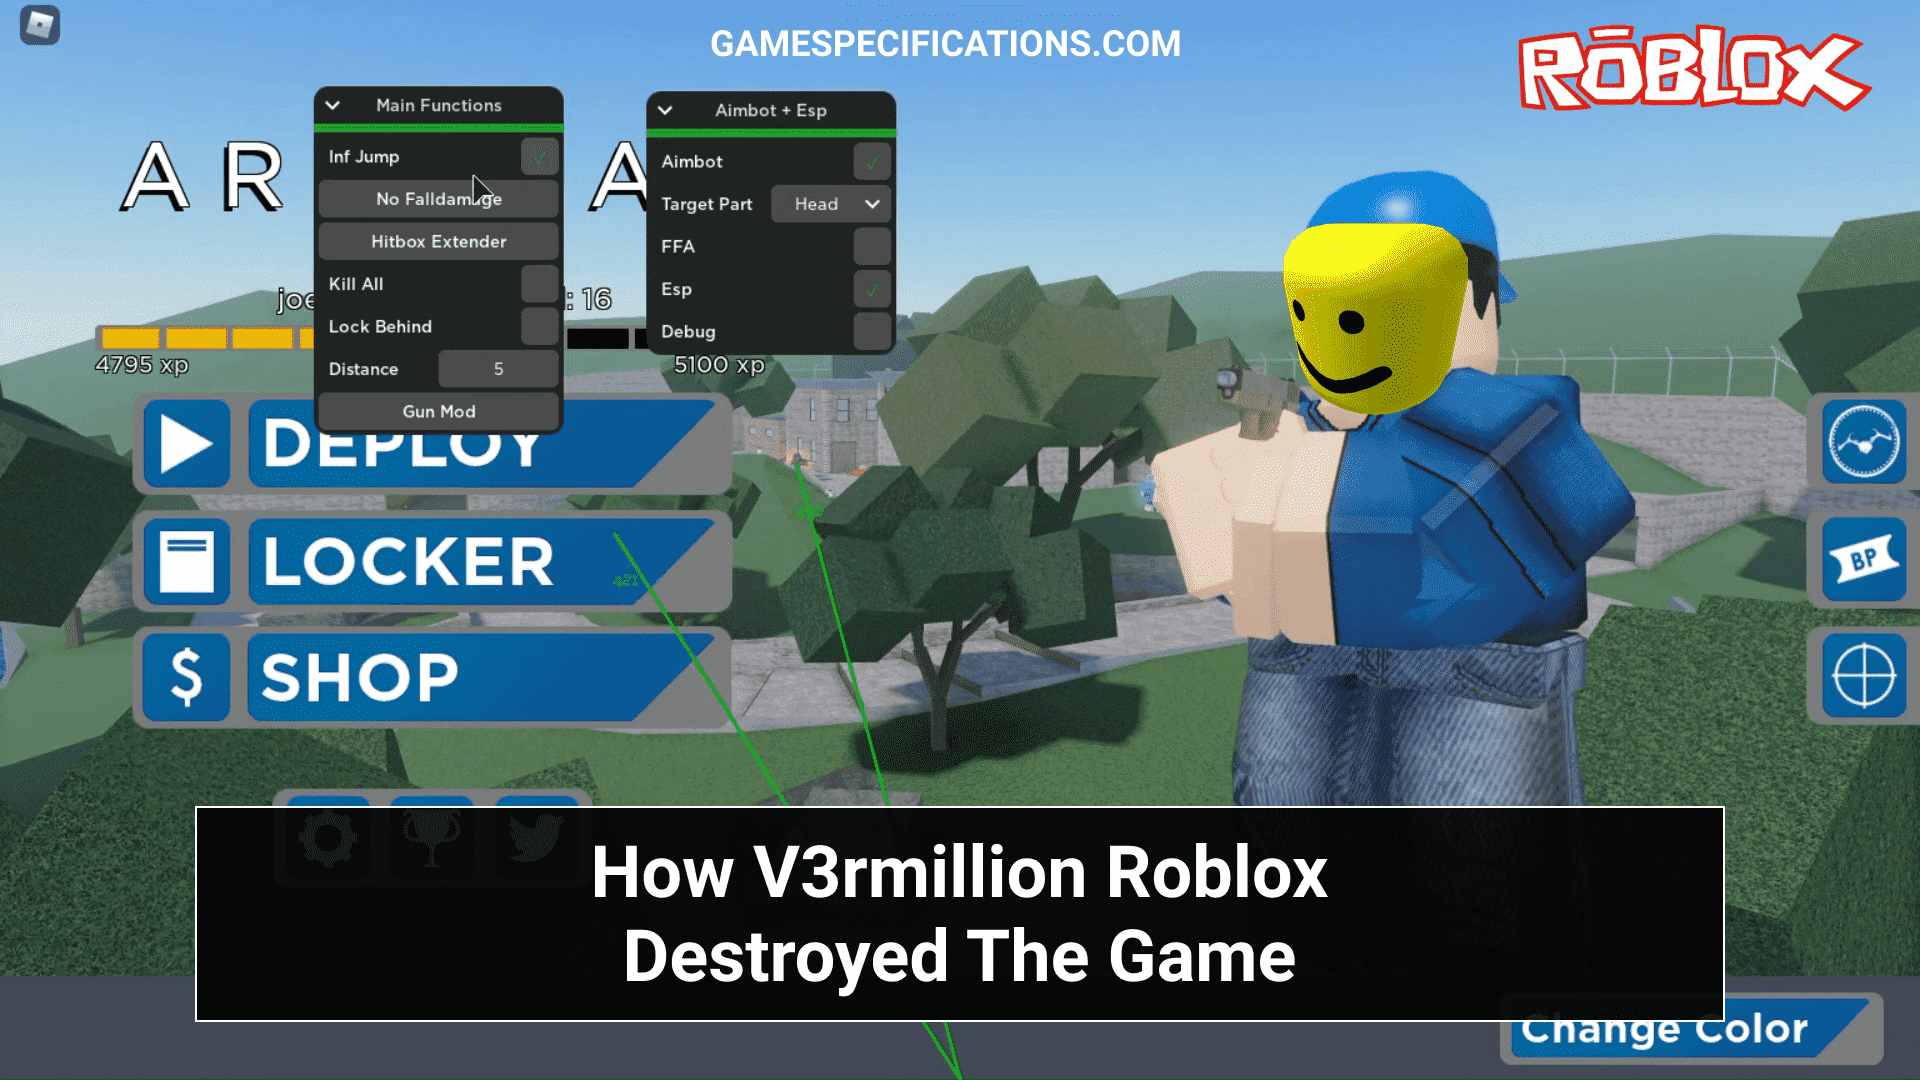 V3rmillion Roblox Breaked The Game By Using Powerful Exploits And Scripts Game Specifications - roblox game scripts v3rmillion